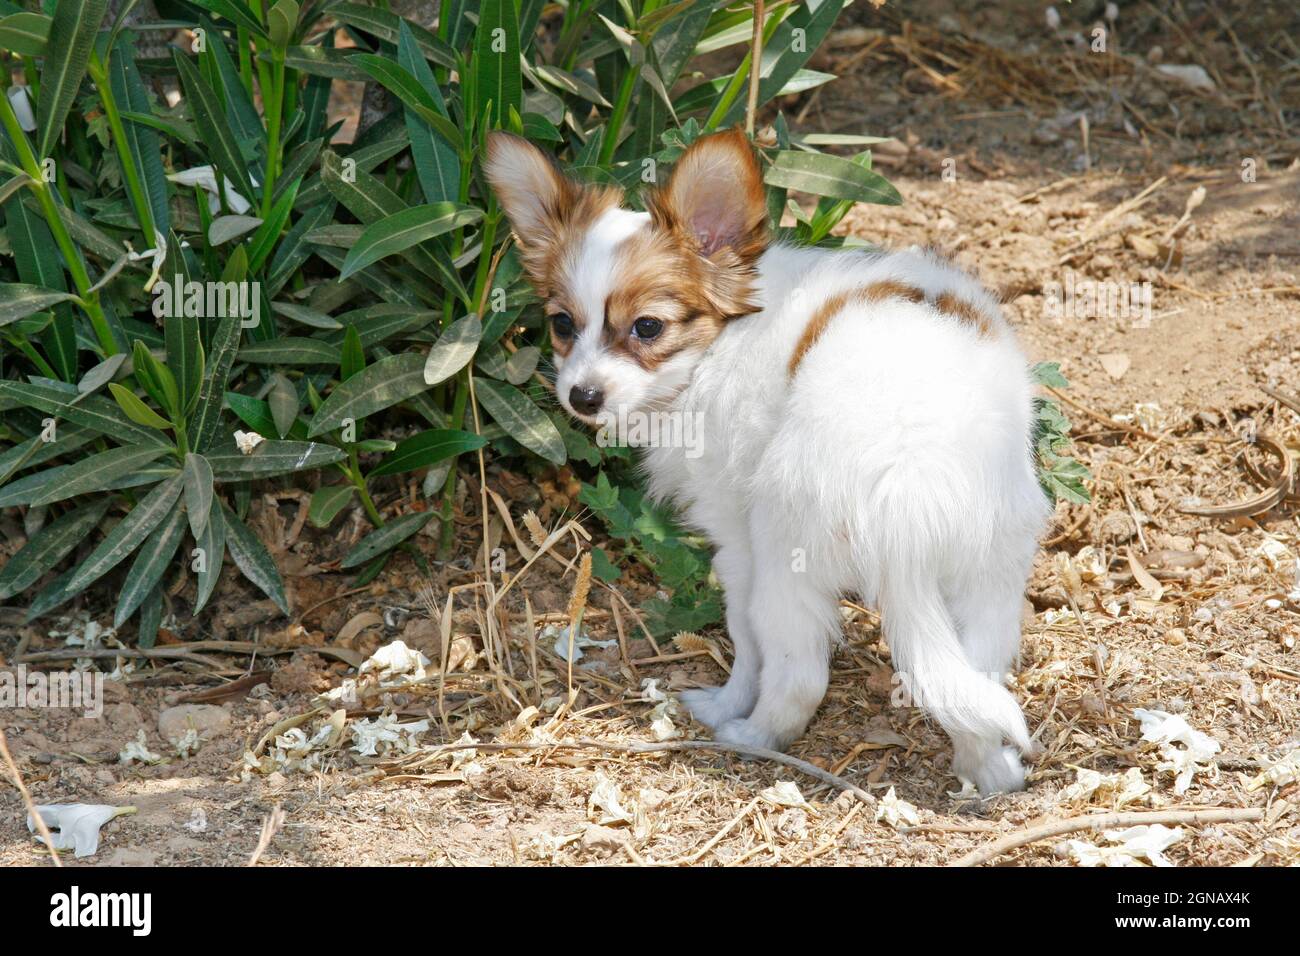 a beautiful 2 month old Papillon puppy, white with beige marks, looks strange and attentive. Countryside, Greece Stock Photo